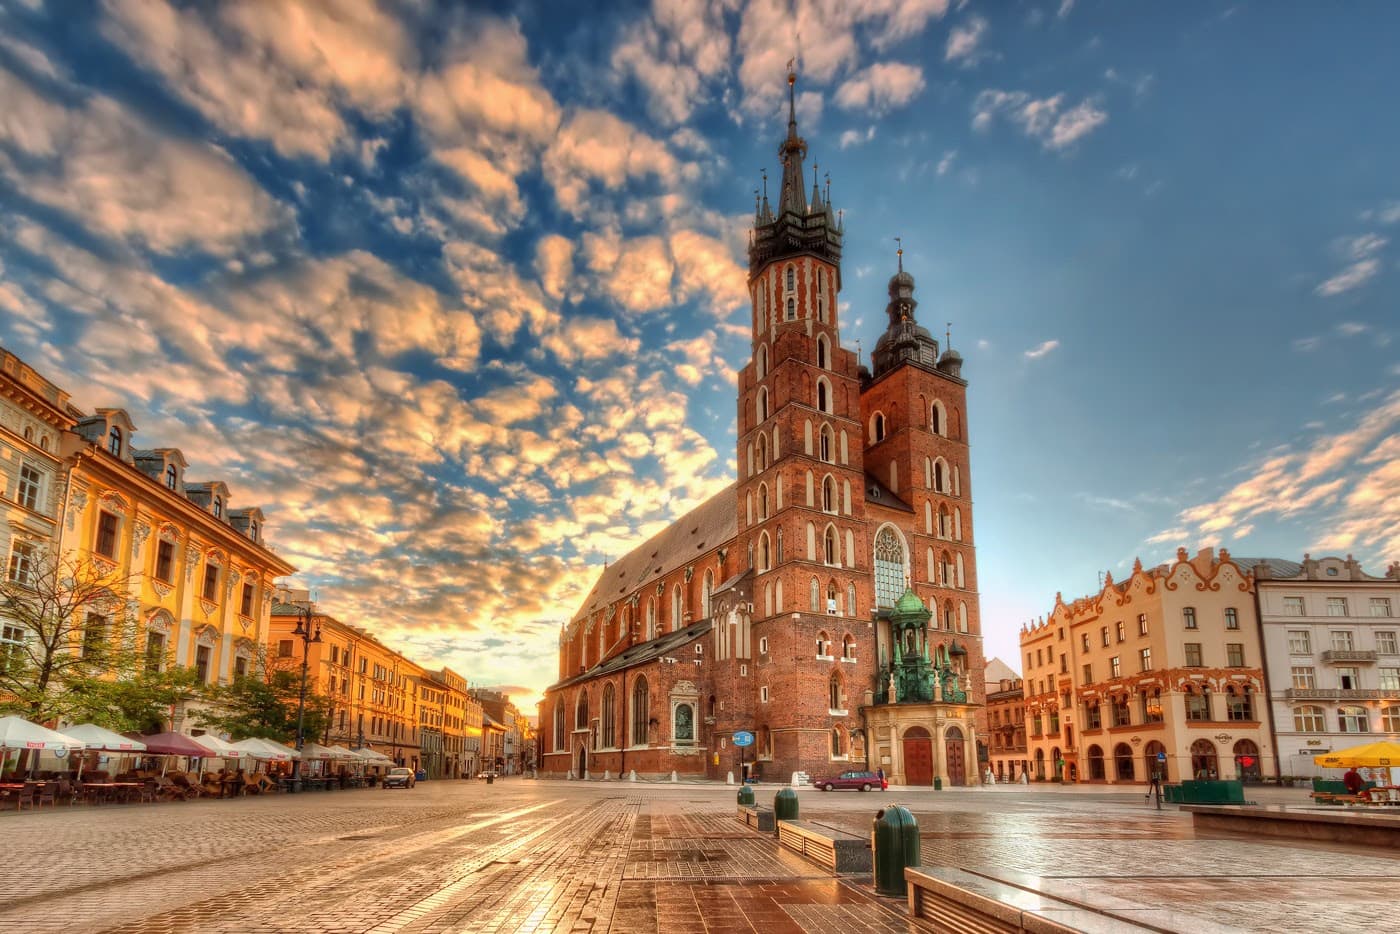 Ways to spend time in Krakow with kids